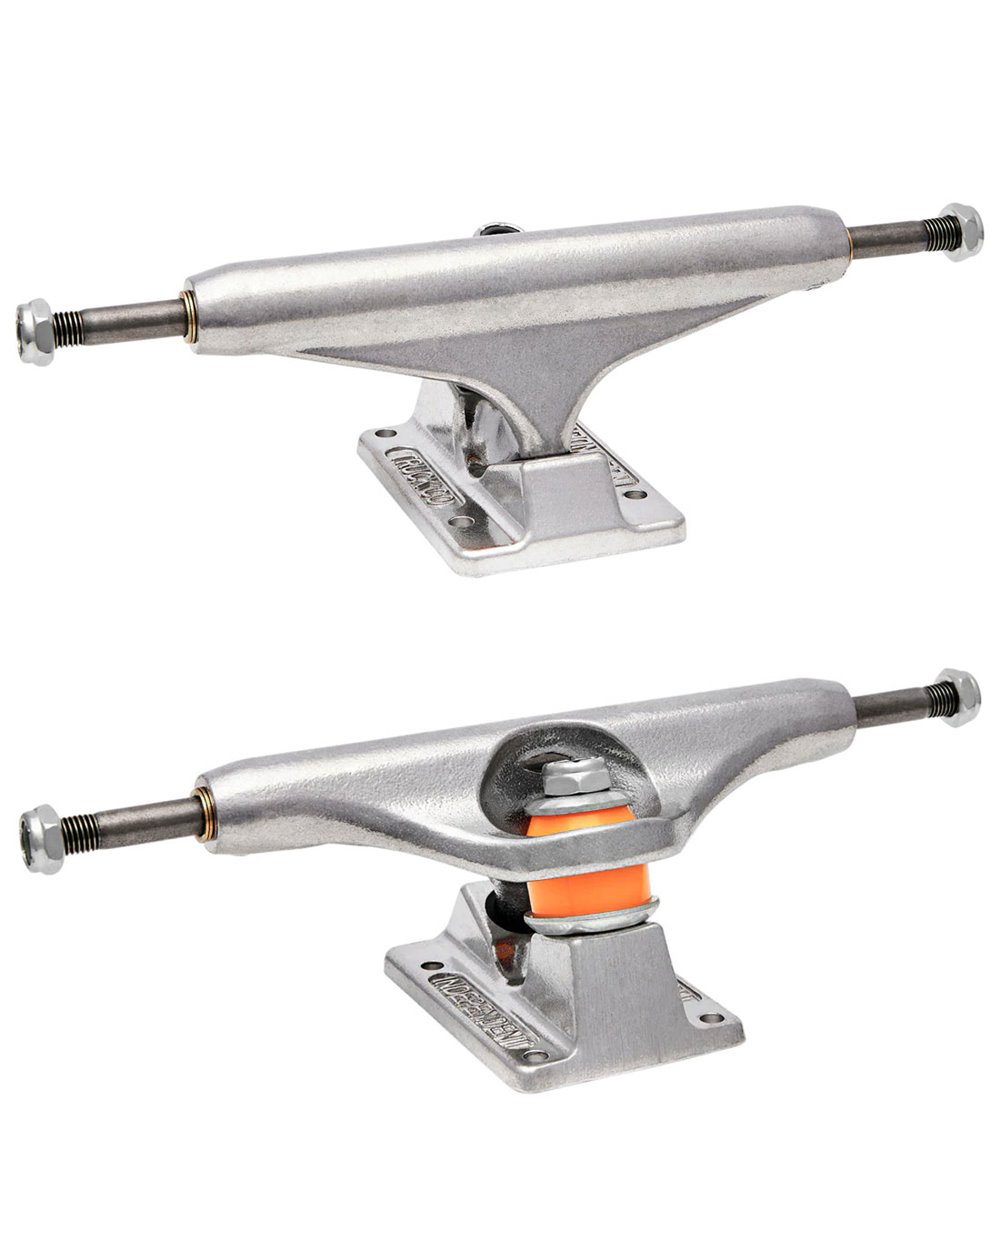 Independent Stage XI Standard 149mm Skateboard Trucks pack of 2